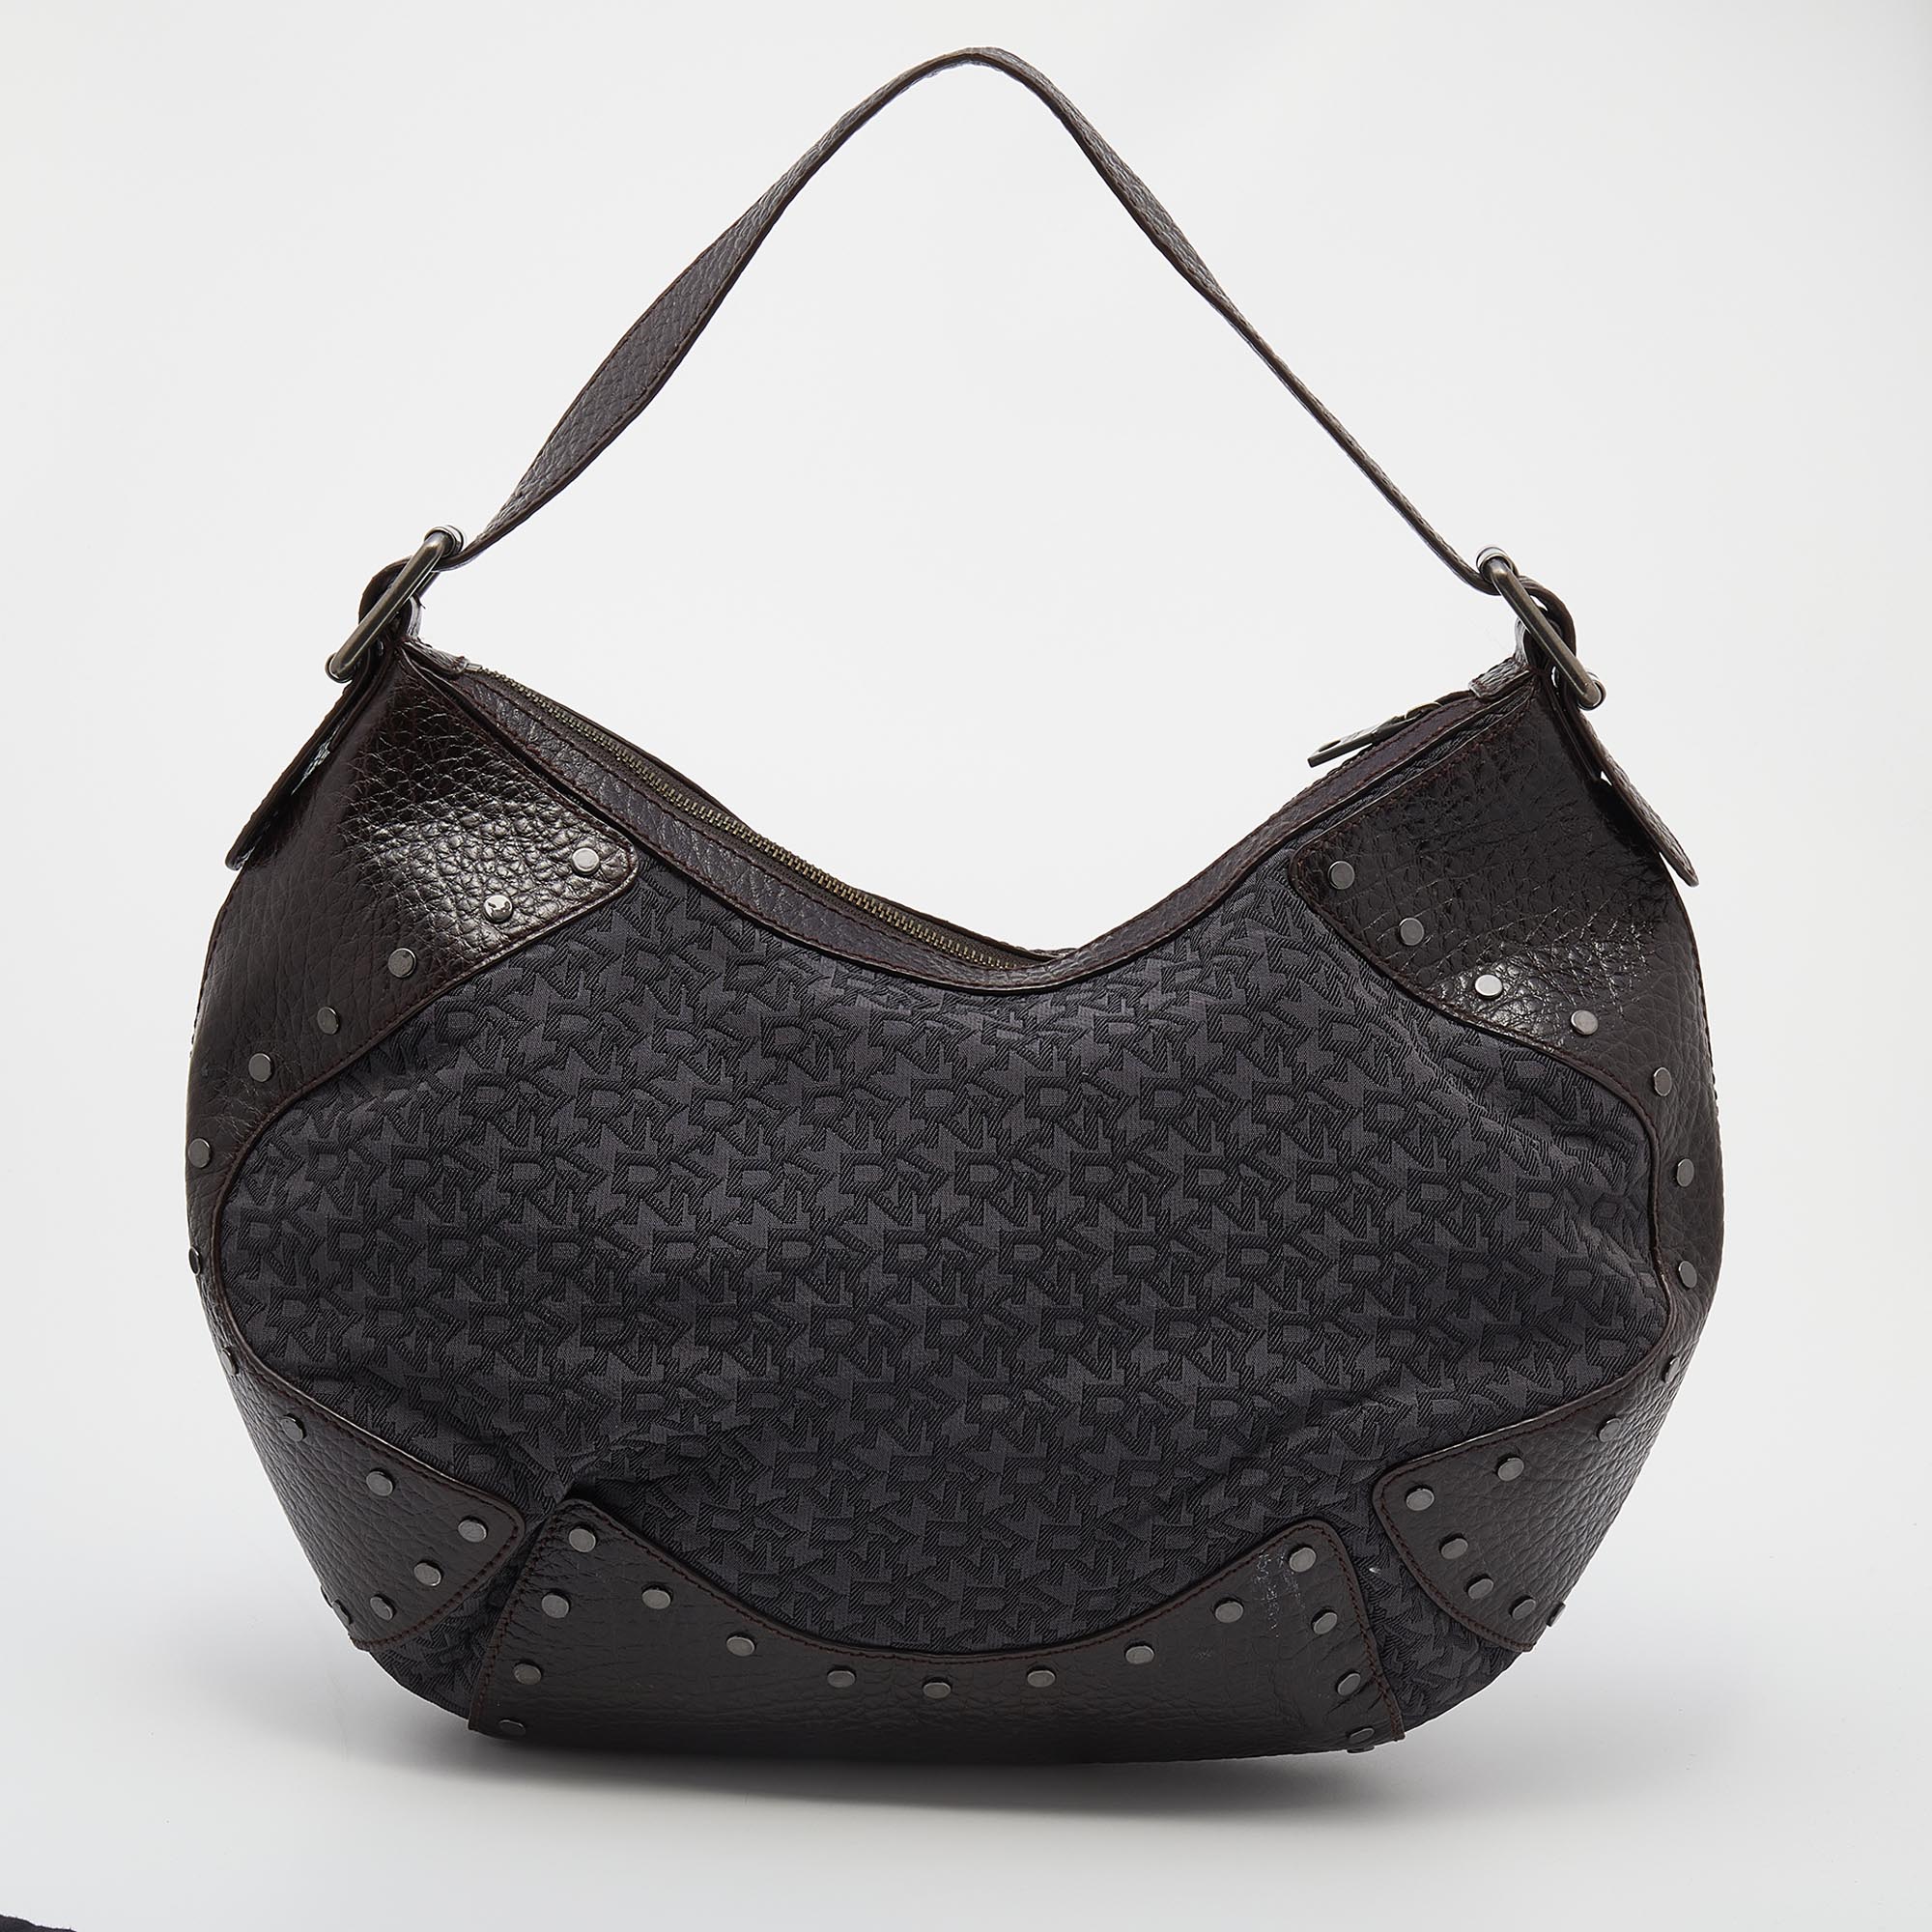 Dkny Brown/Grey Leather And Canvas Studded Hobo